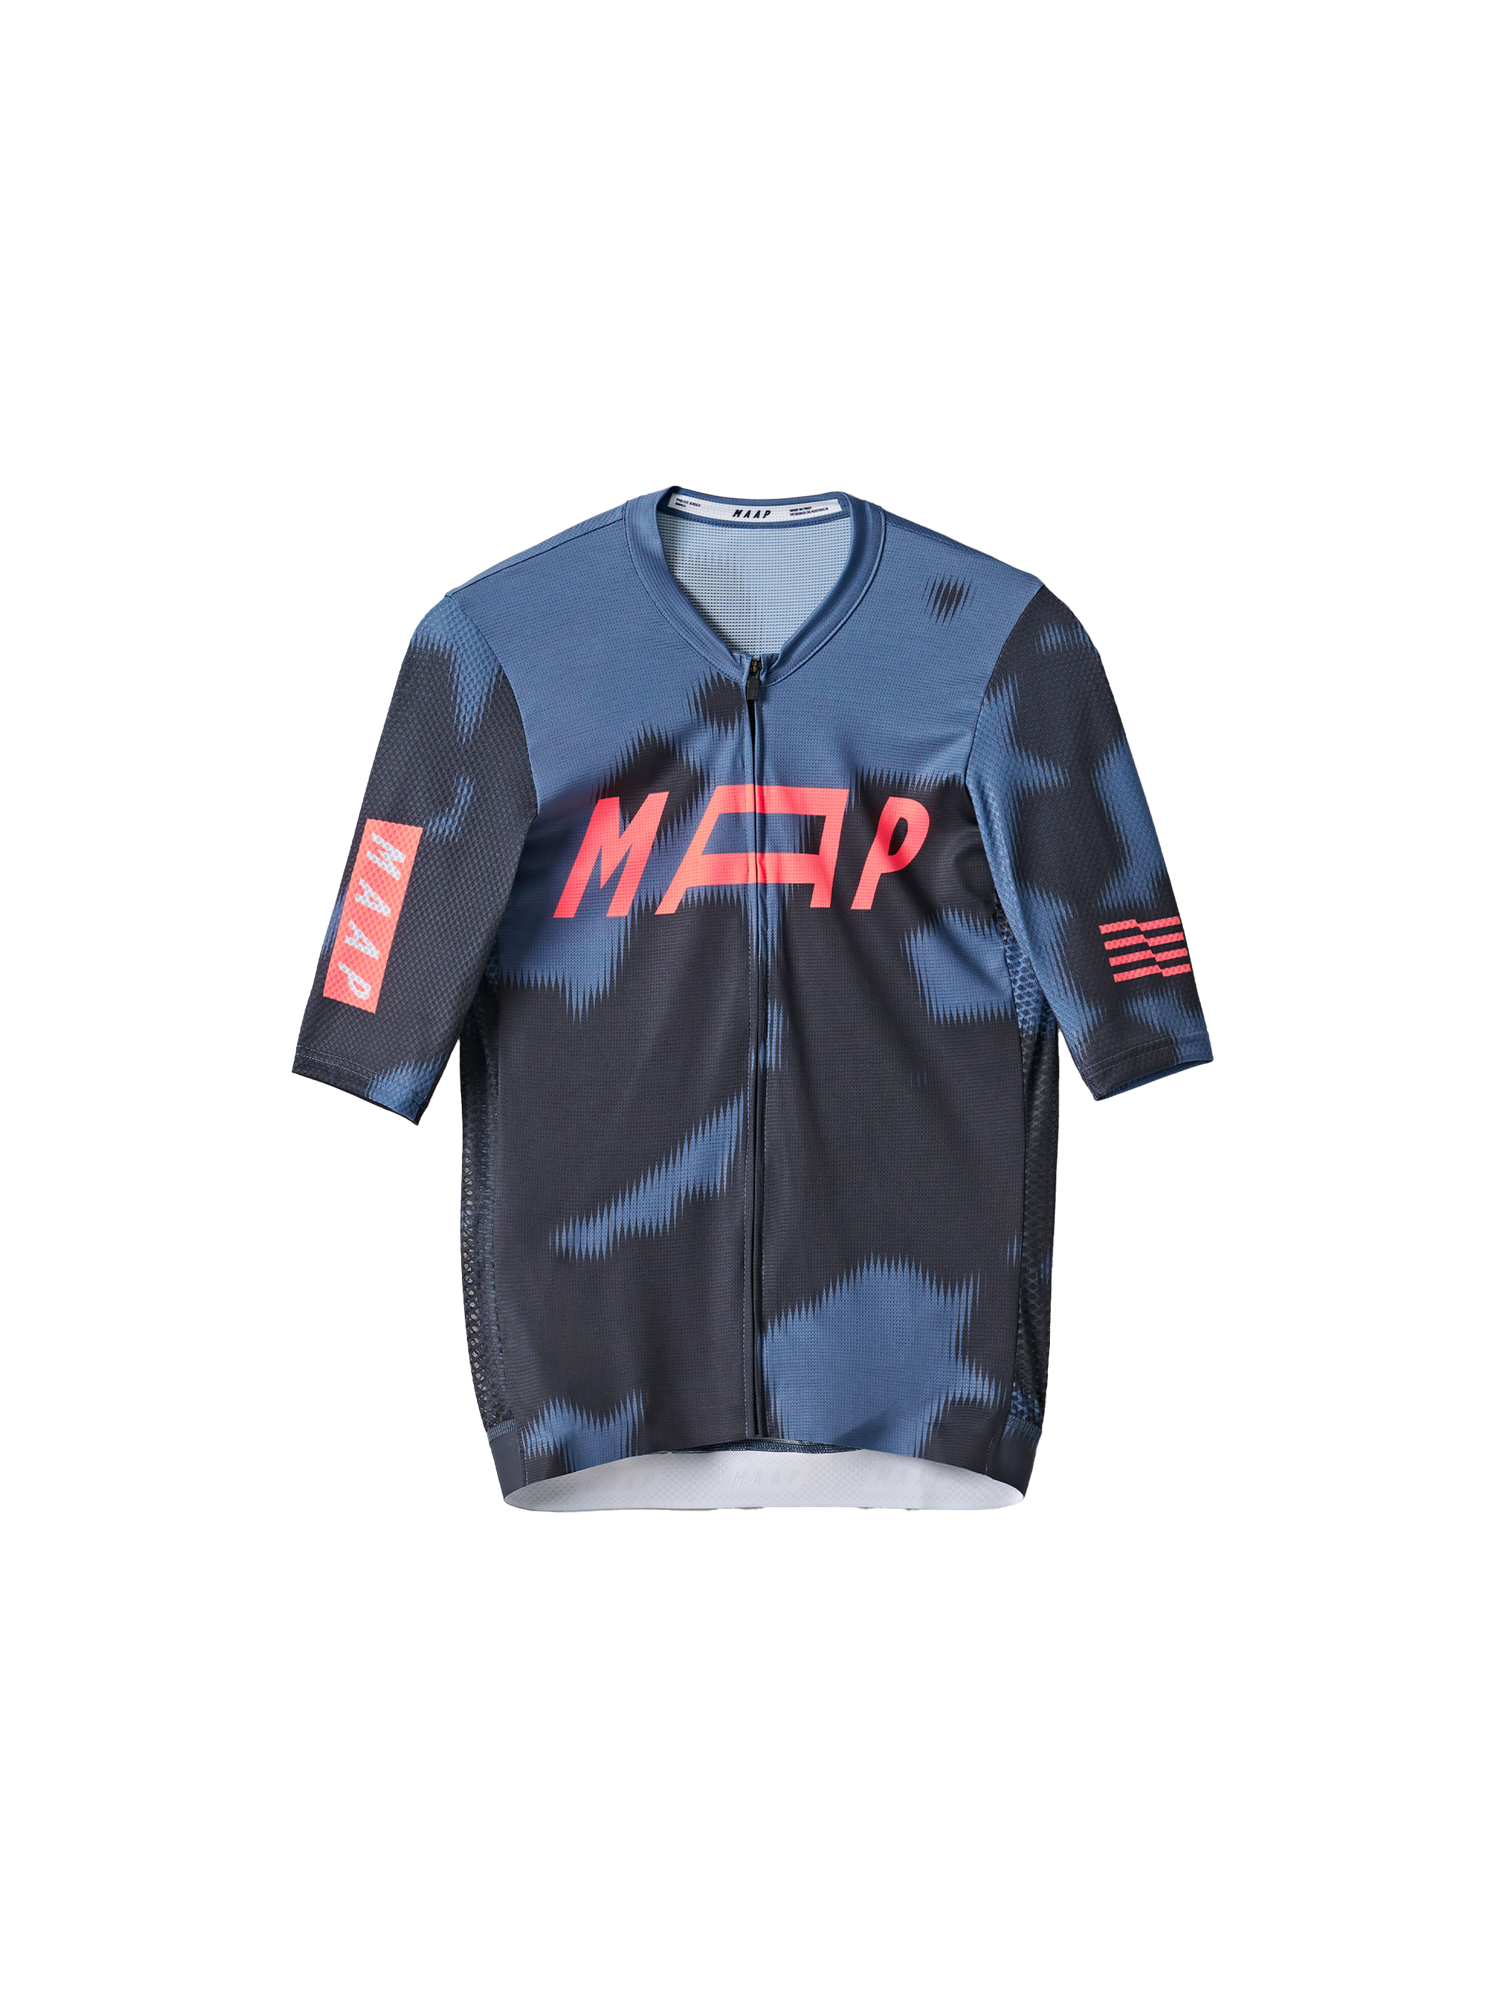 Privateer H.S Pro Jersey